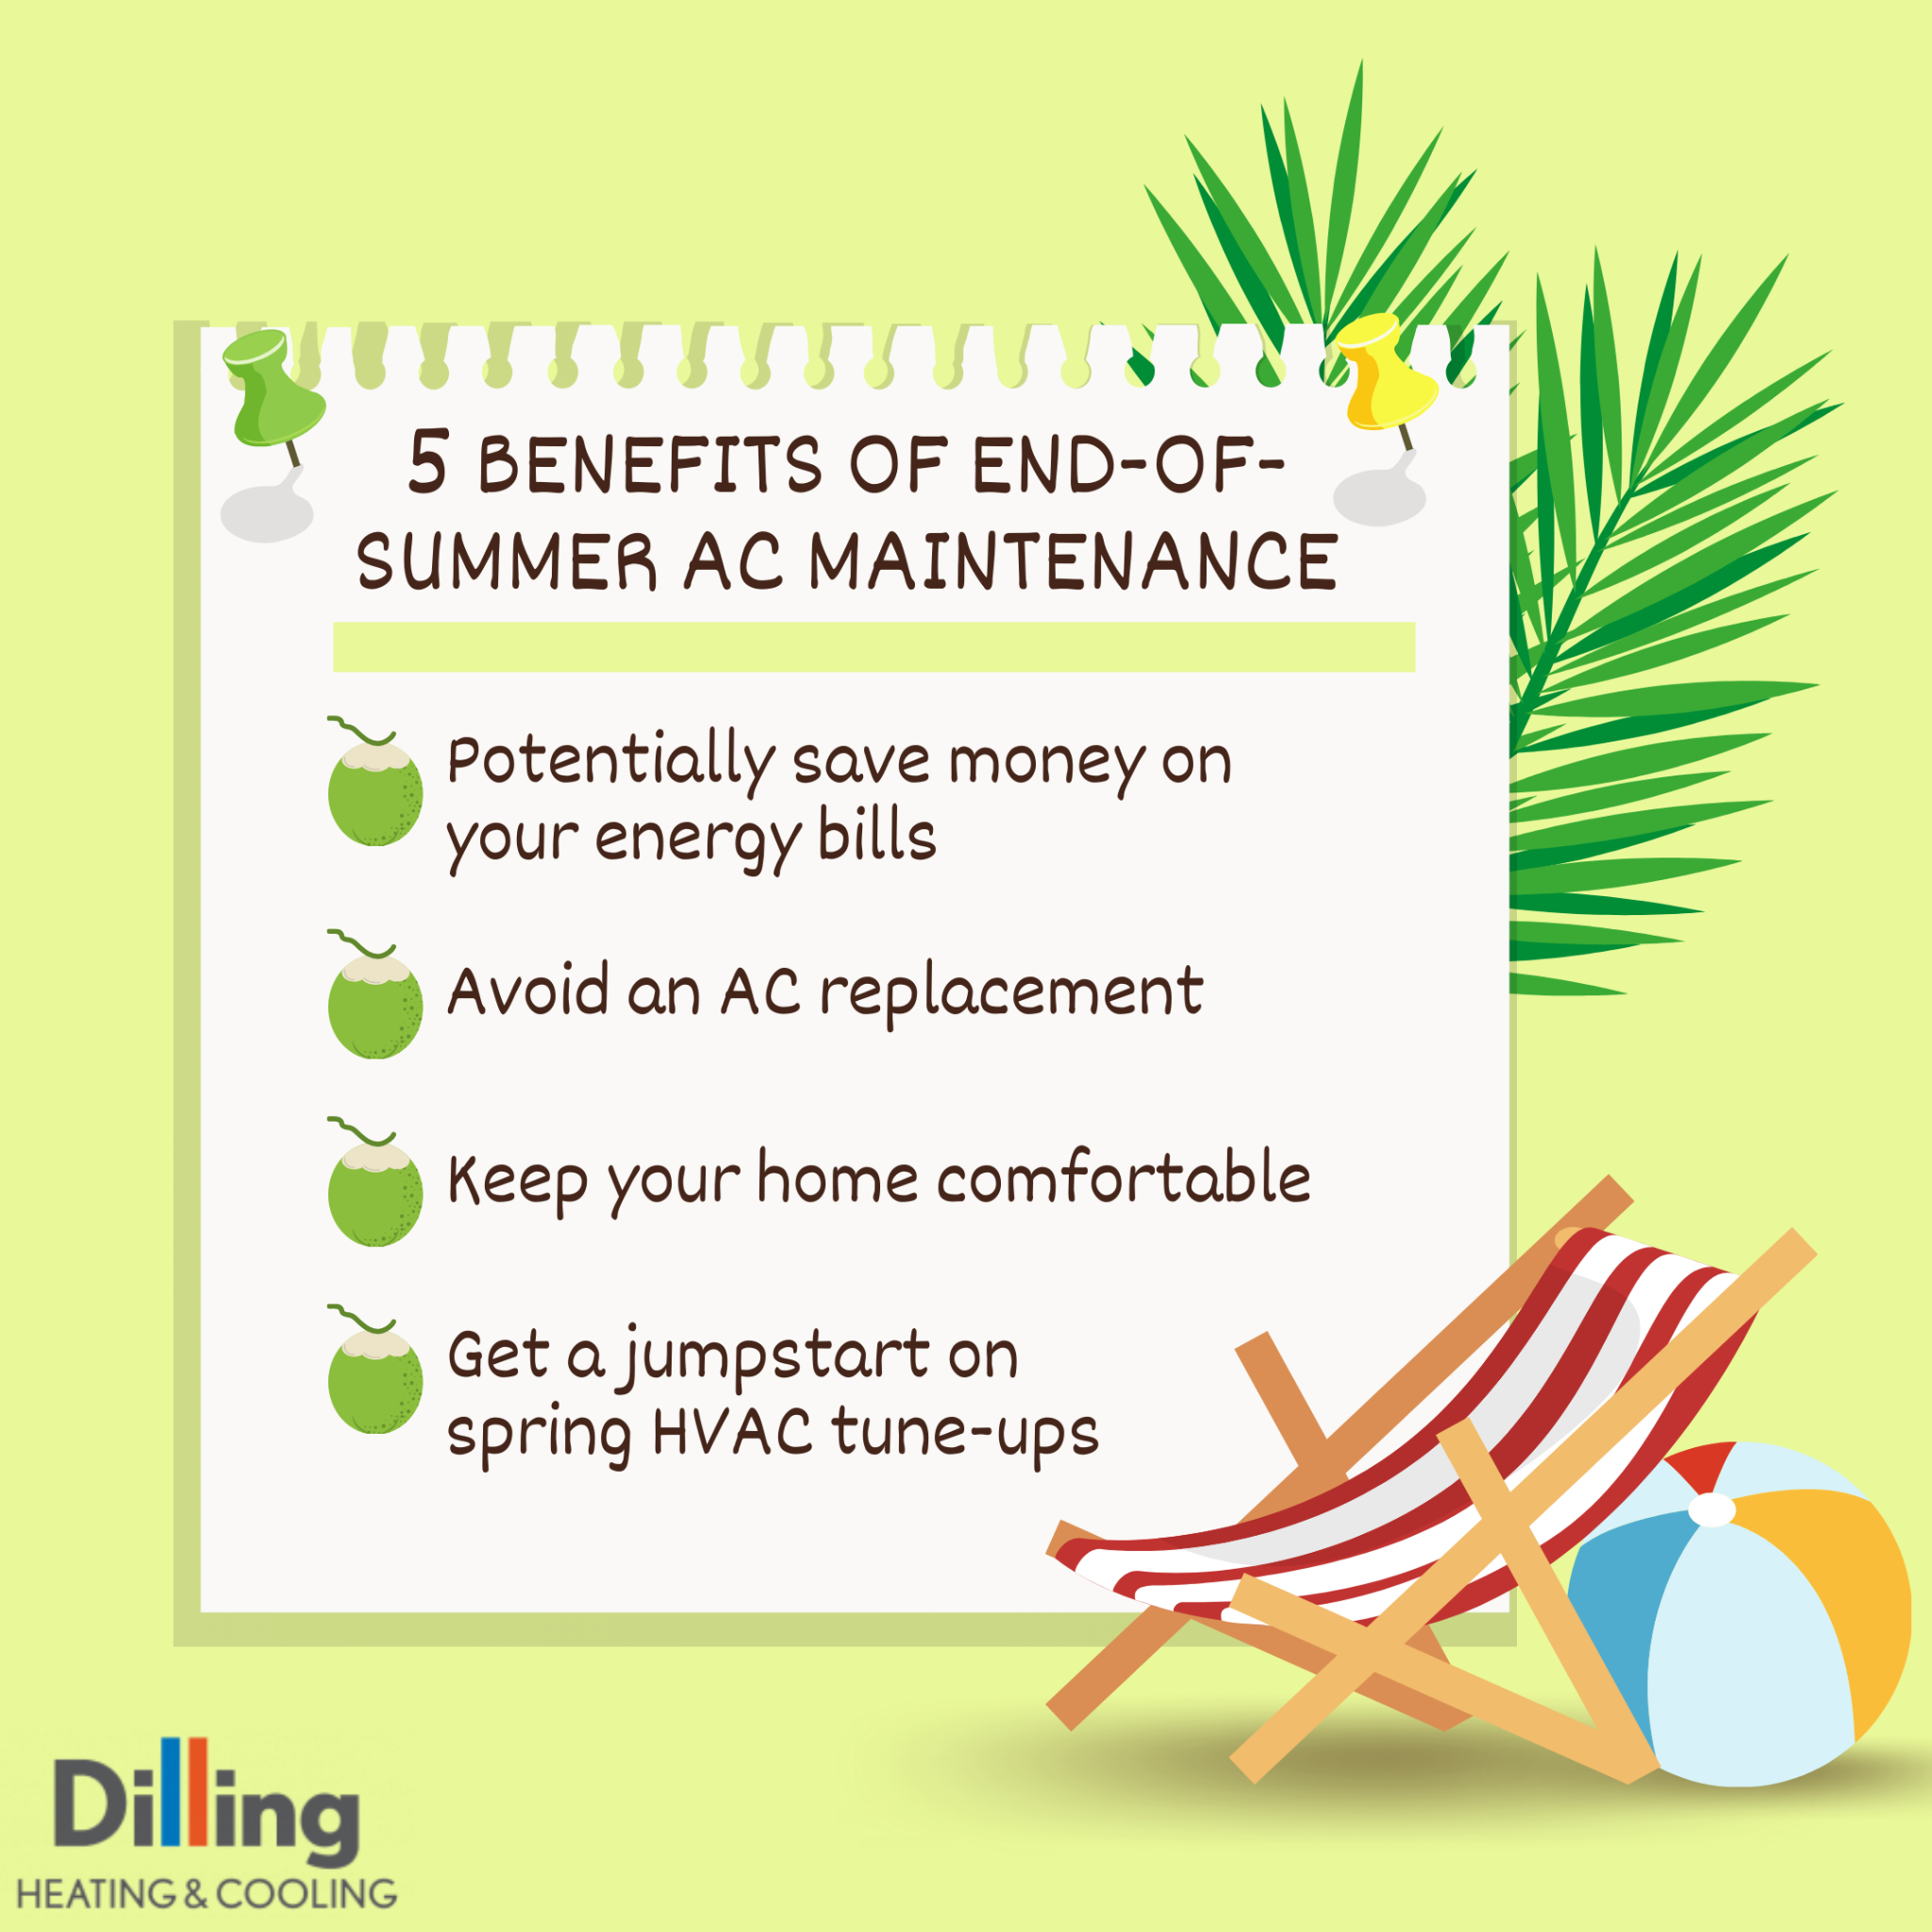 Benefits Of End-of-summer Ac Maintenance